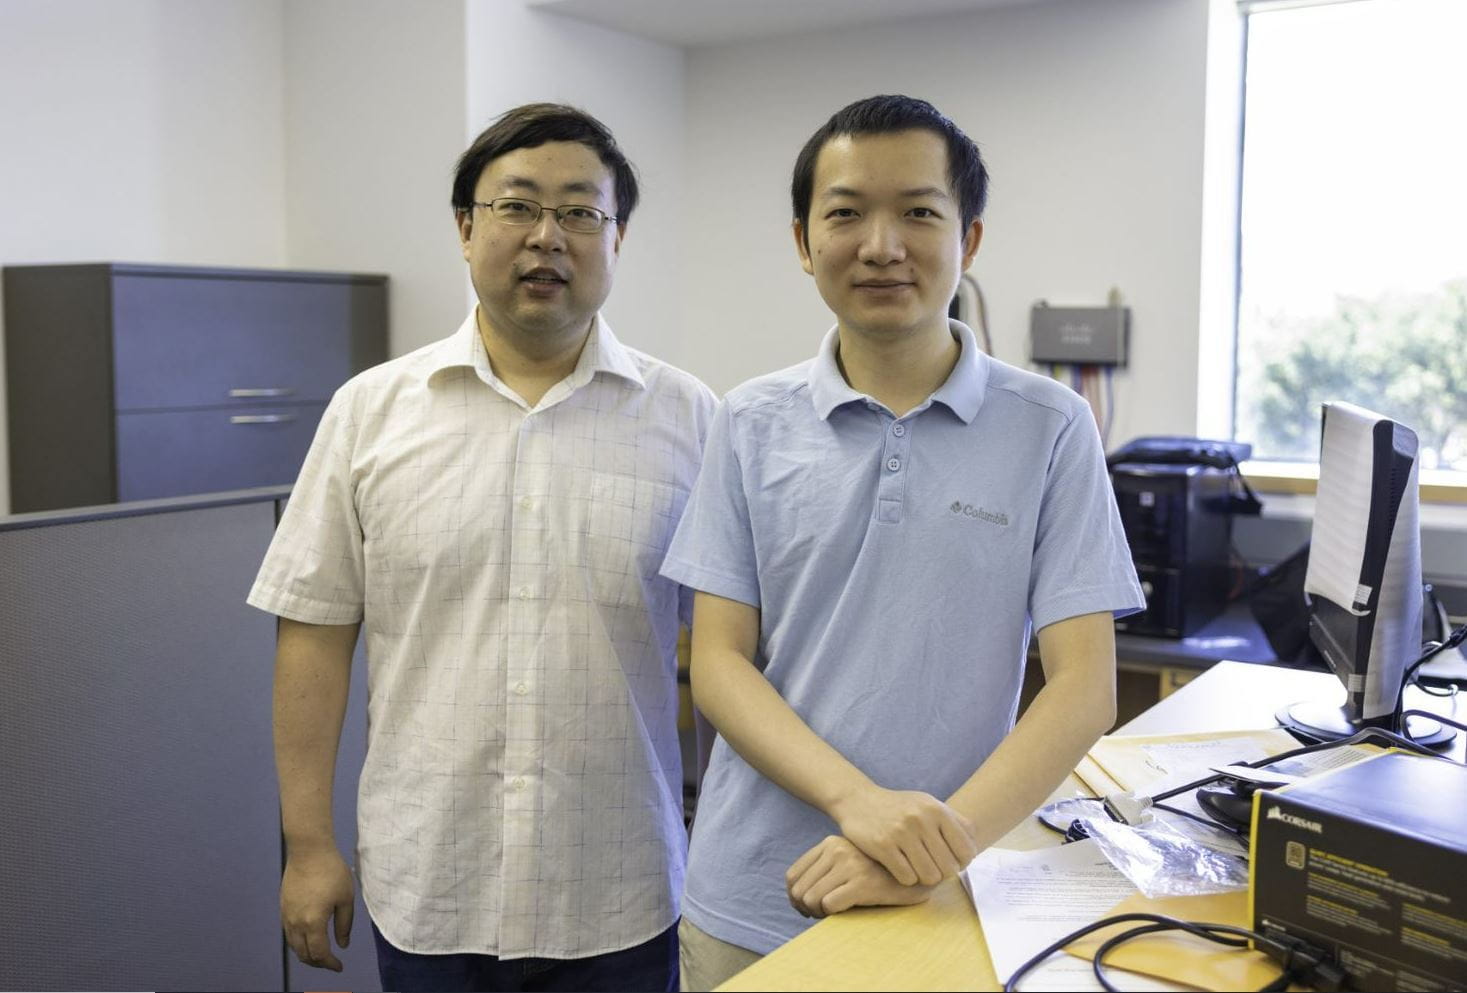 Jiang Ming (left) and Haotian Zhang." _languageinserted="true